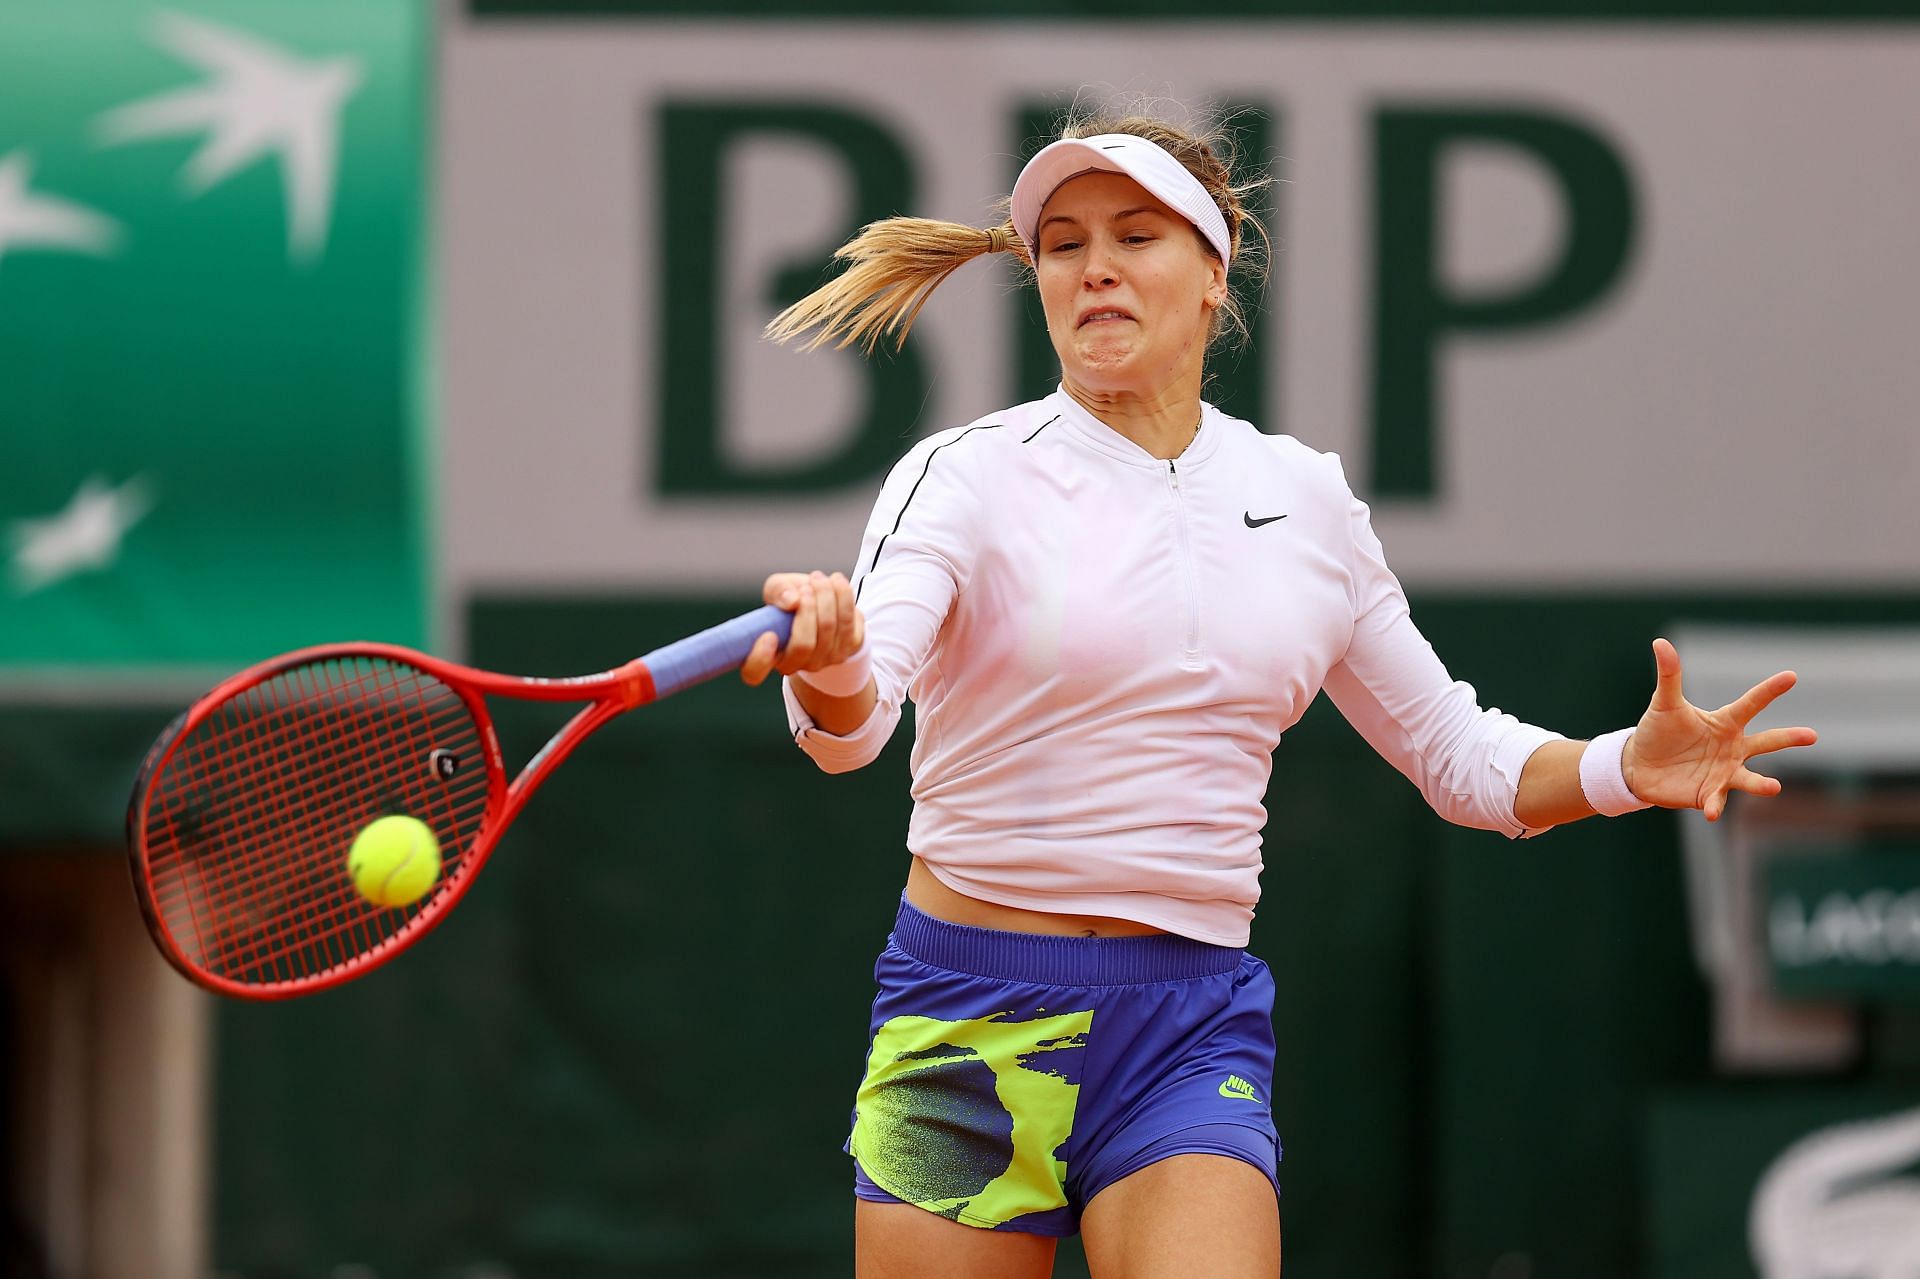 Eugenie Bouchard in action at the 2020 French Open.